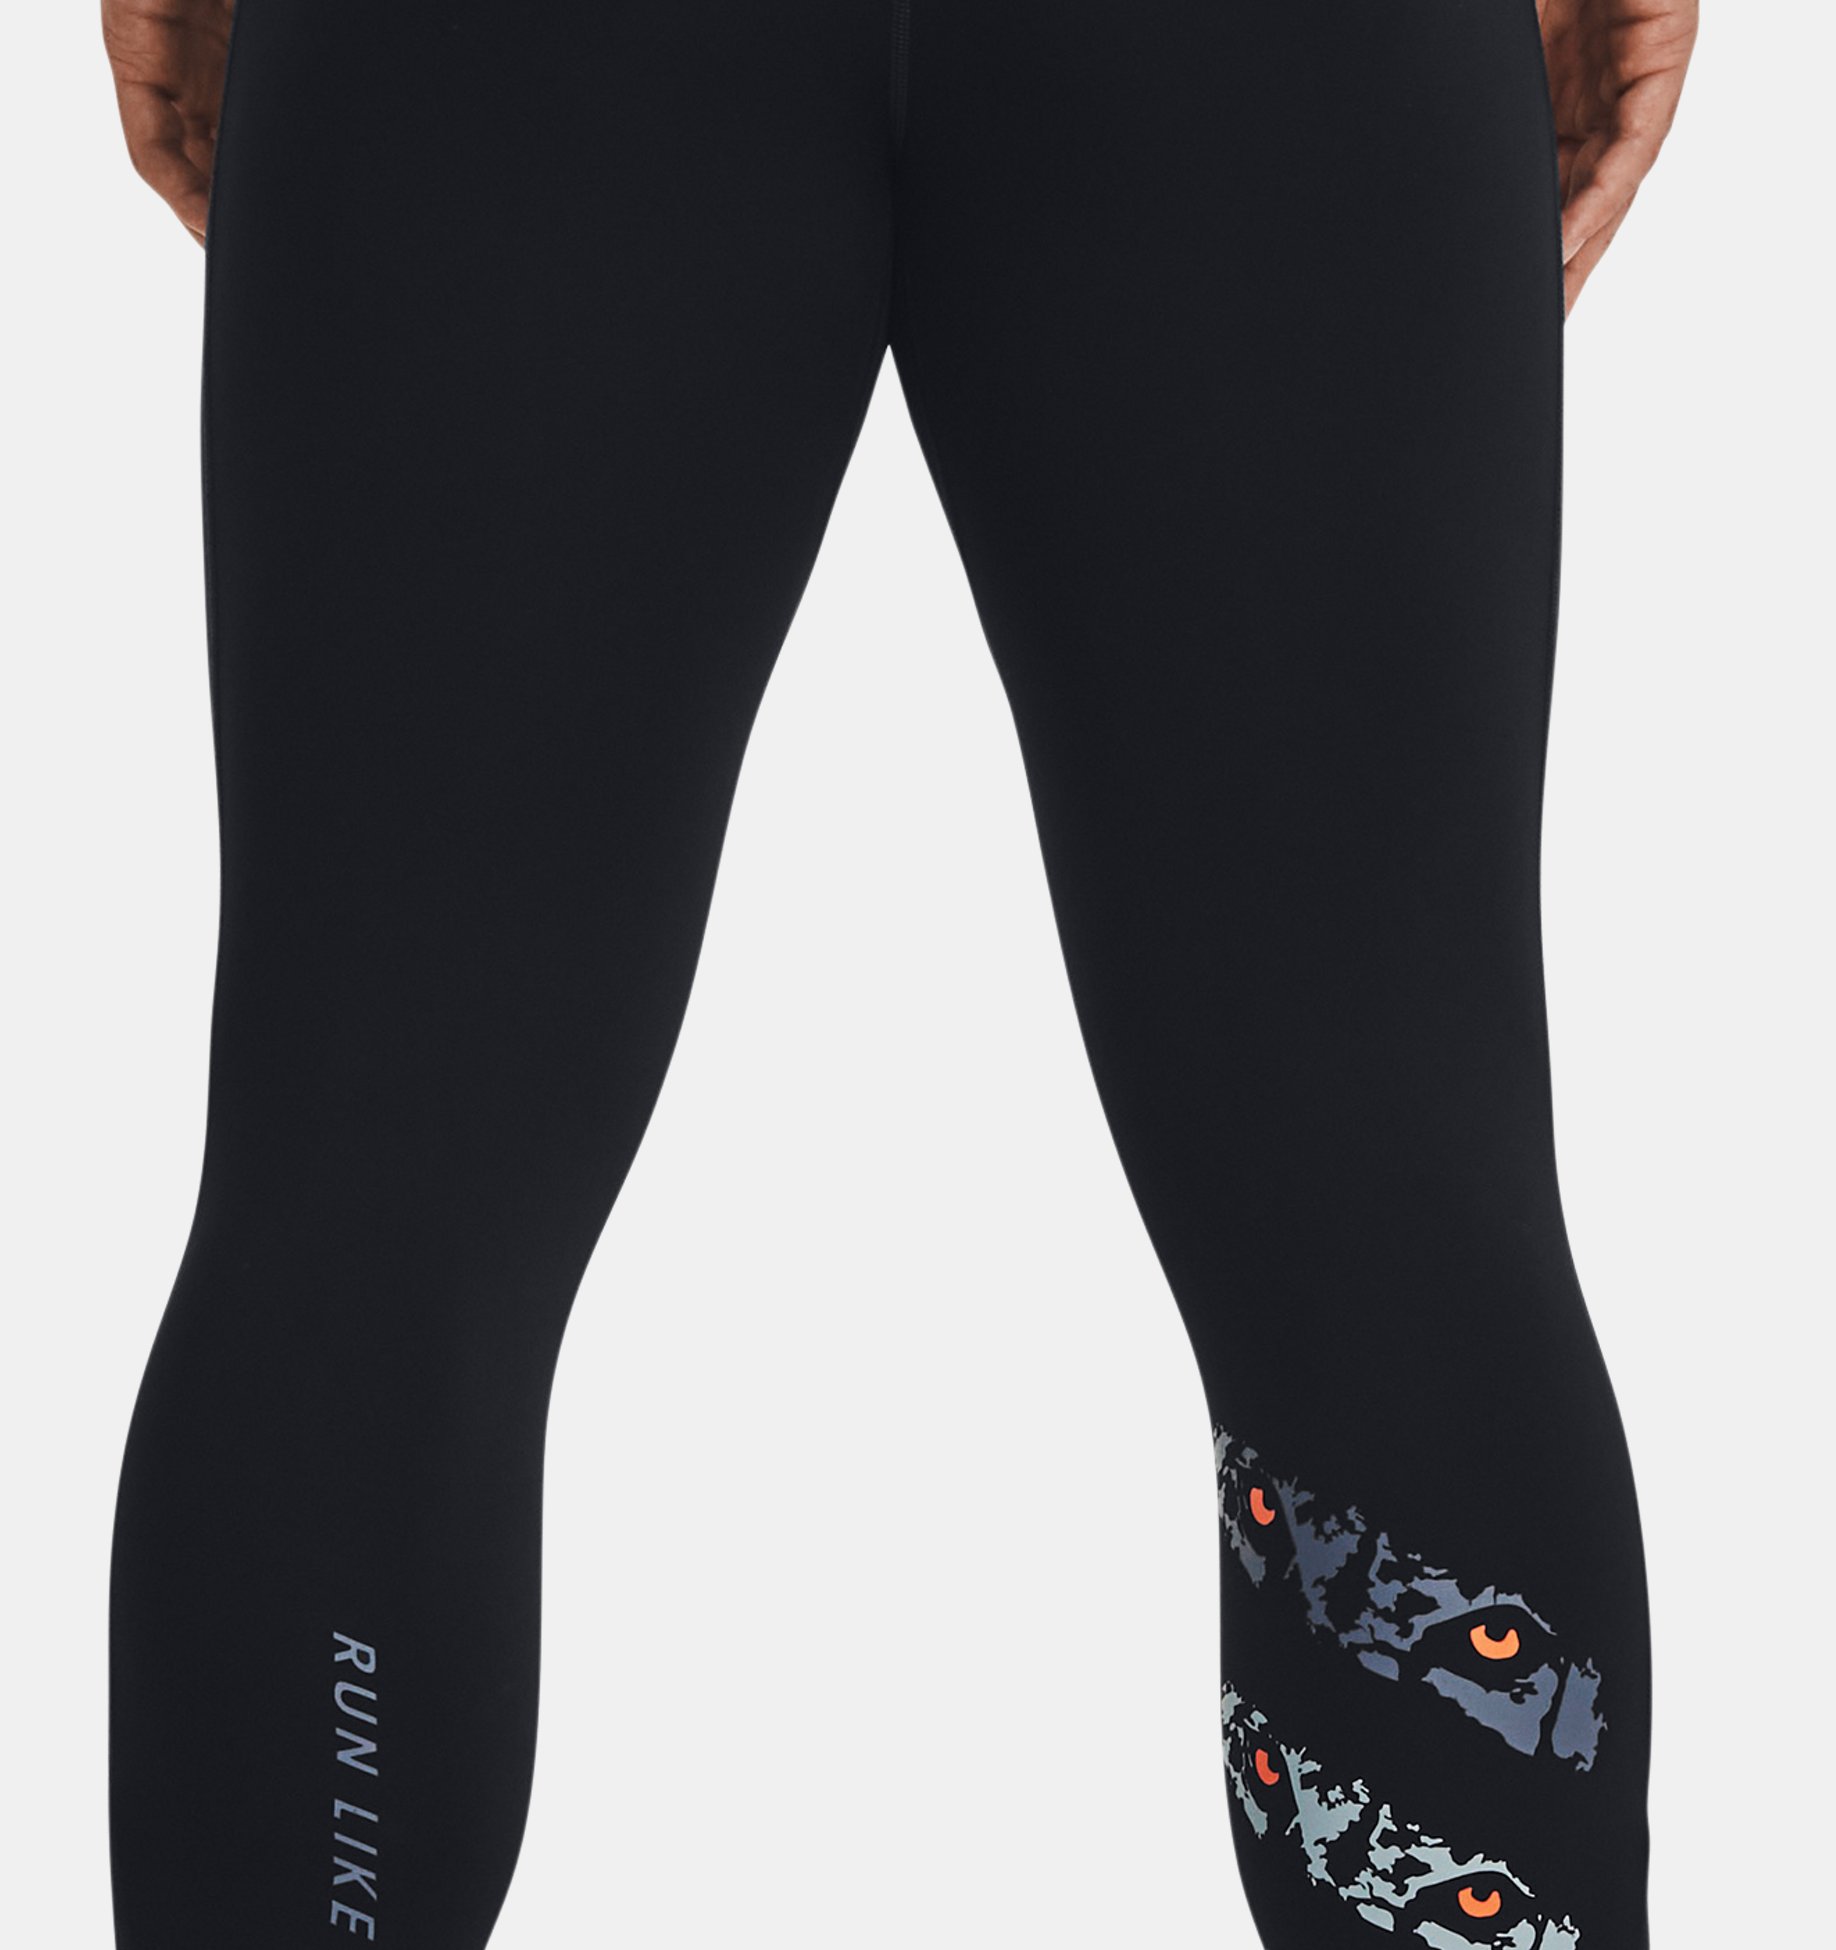 https://underarmour.scene7.com/is/image/Underarmour/V5-1379297-001_BC?rp=standard-0pad|pdpZoomDesktop&scl=0.72&fmt=jpg&qlt=85&resMode=sharp2&cache=on,on&bgc=f0f0f0&wid=1836&hei=1950&size=1500,1500